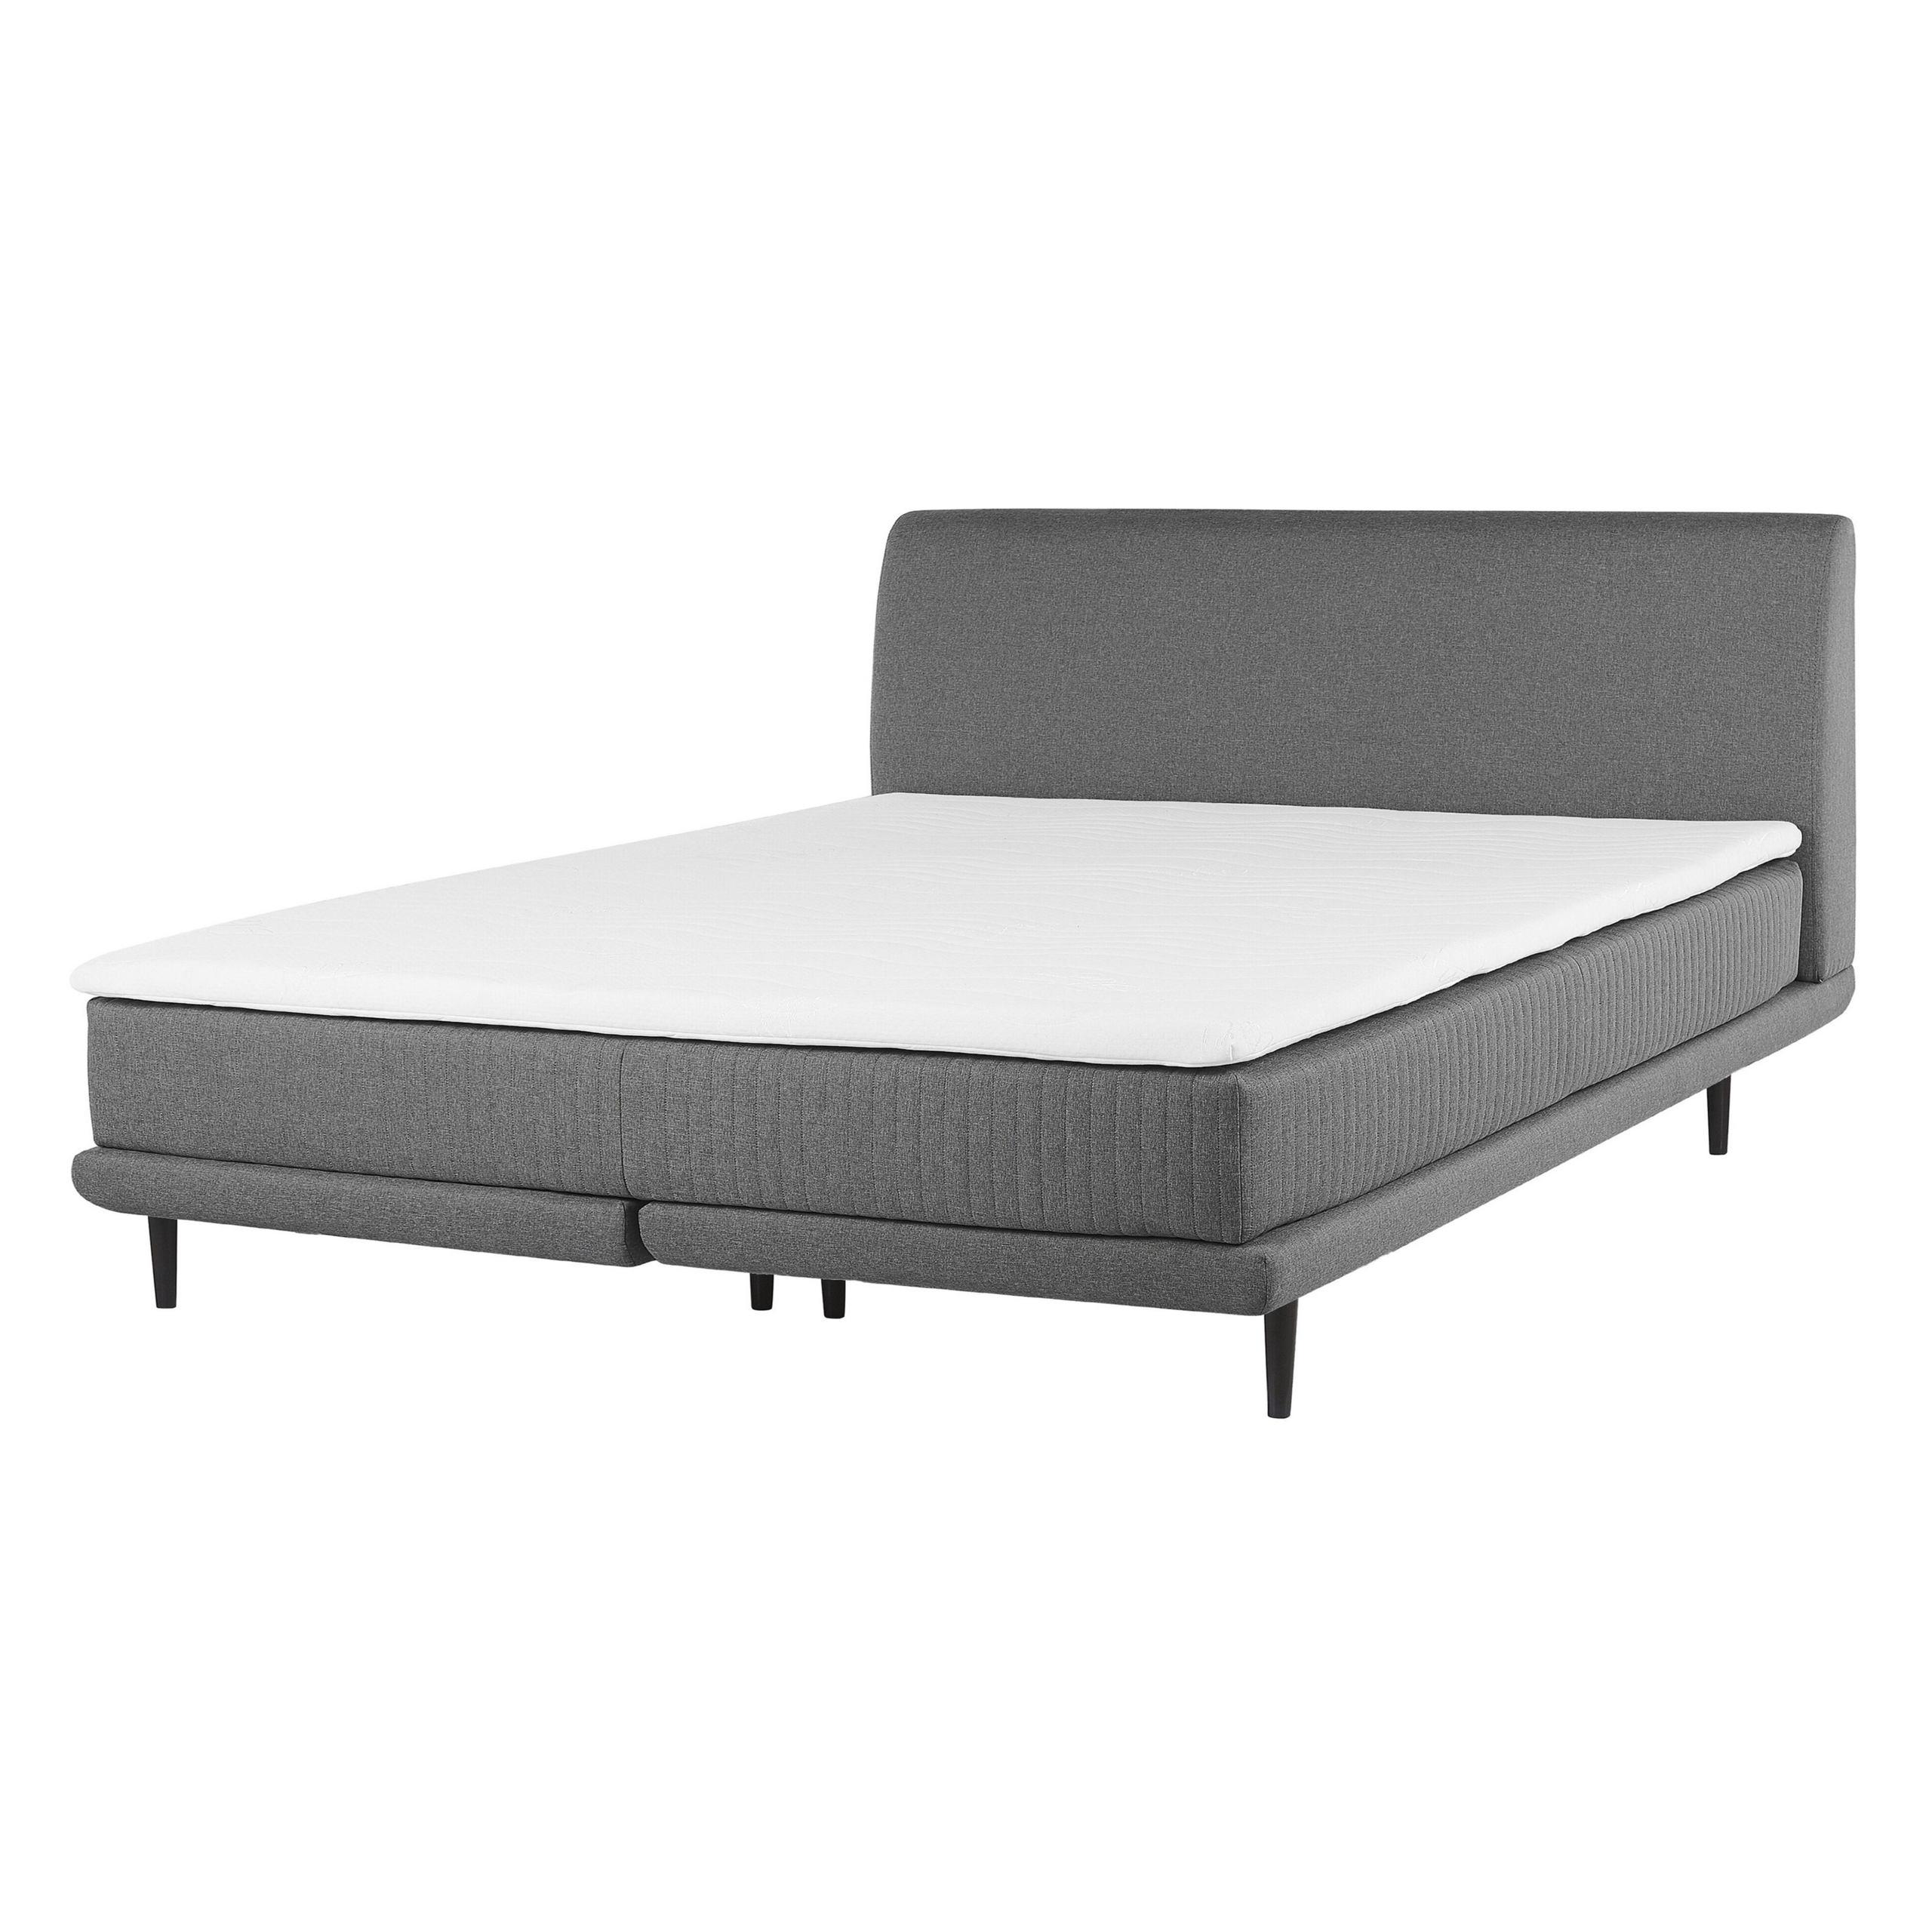 Beliani EU Double Continental Divan Bed Light Grey Fabric with Zigzag Spring Mattress 4ft6 and Topper